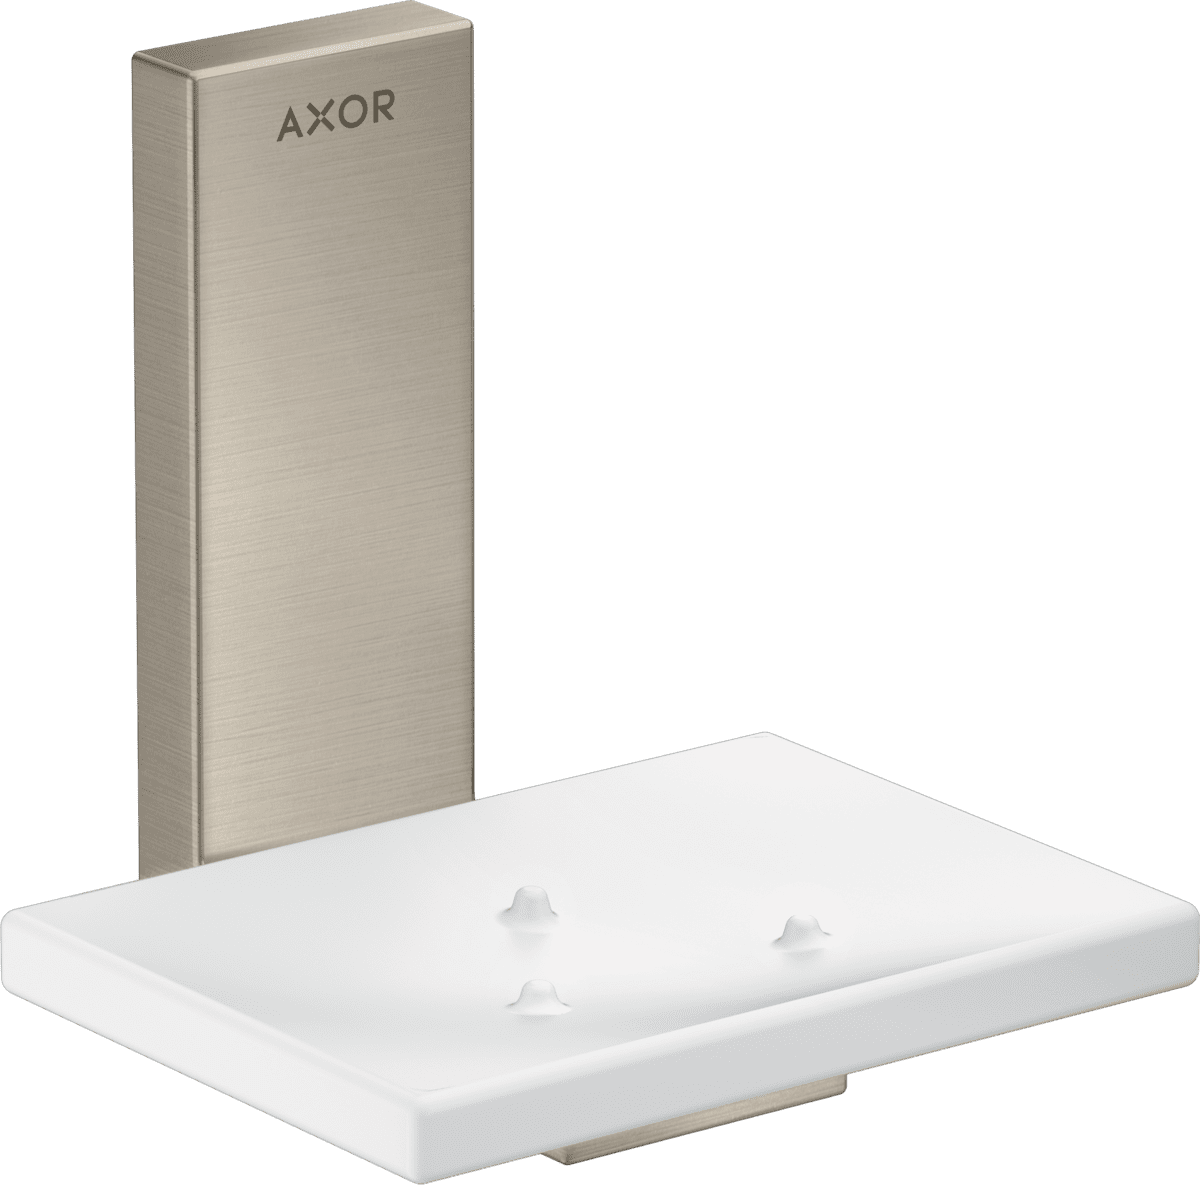 Picture of HANSGROHE AXOR Universal Rectangular Soap dish #42605820 - Brushed Nickel